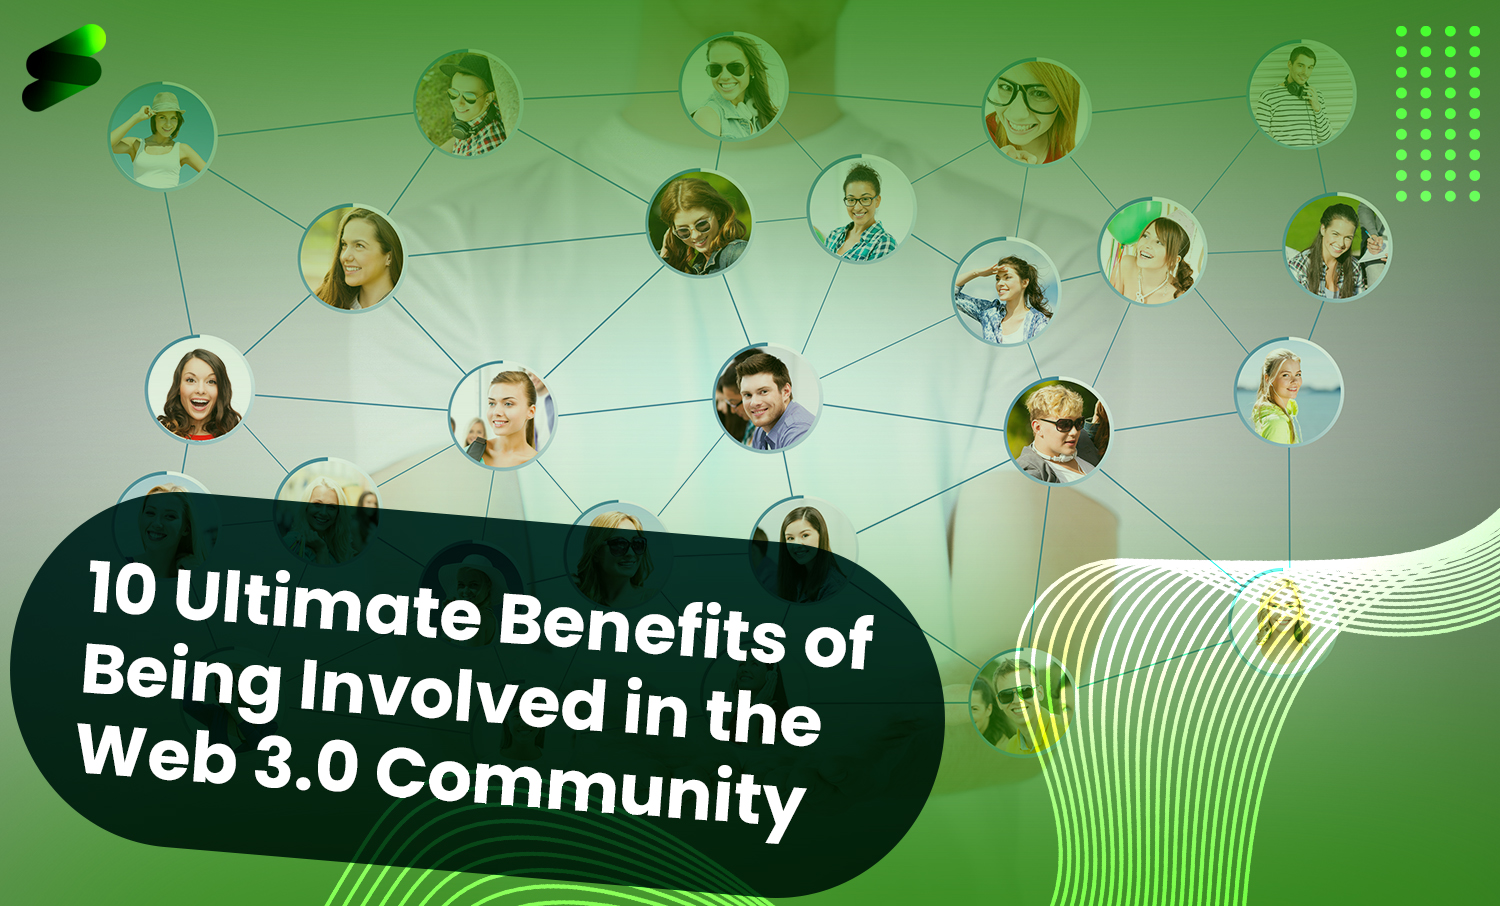 The 10 Ultimate Benefits of Being Involved in the Web 3.0 Community